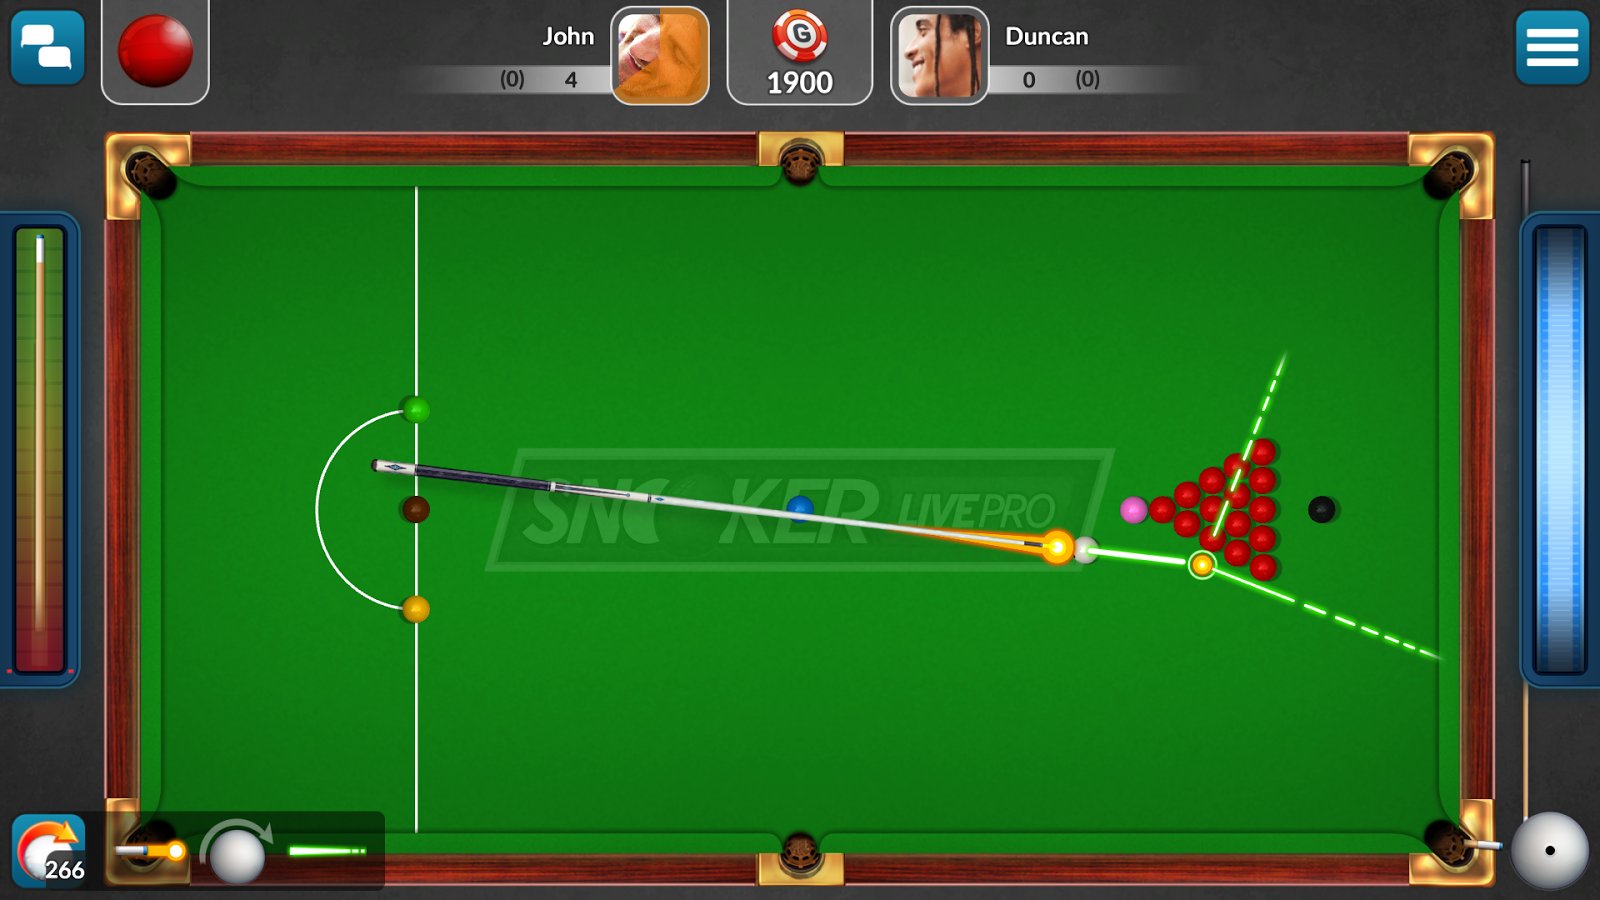 Snooker Live Pro v1.3.4 APK for Android